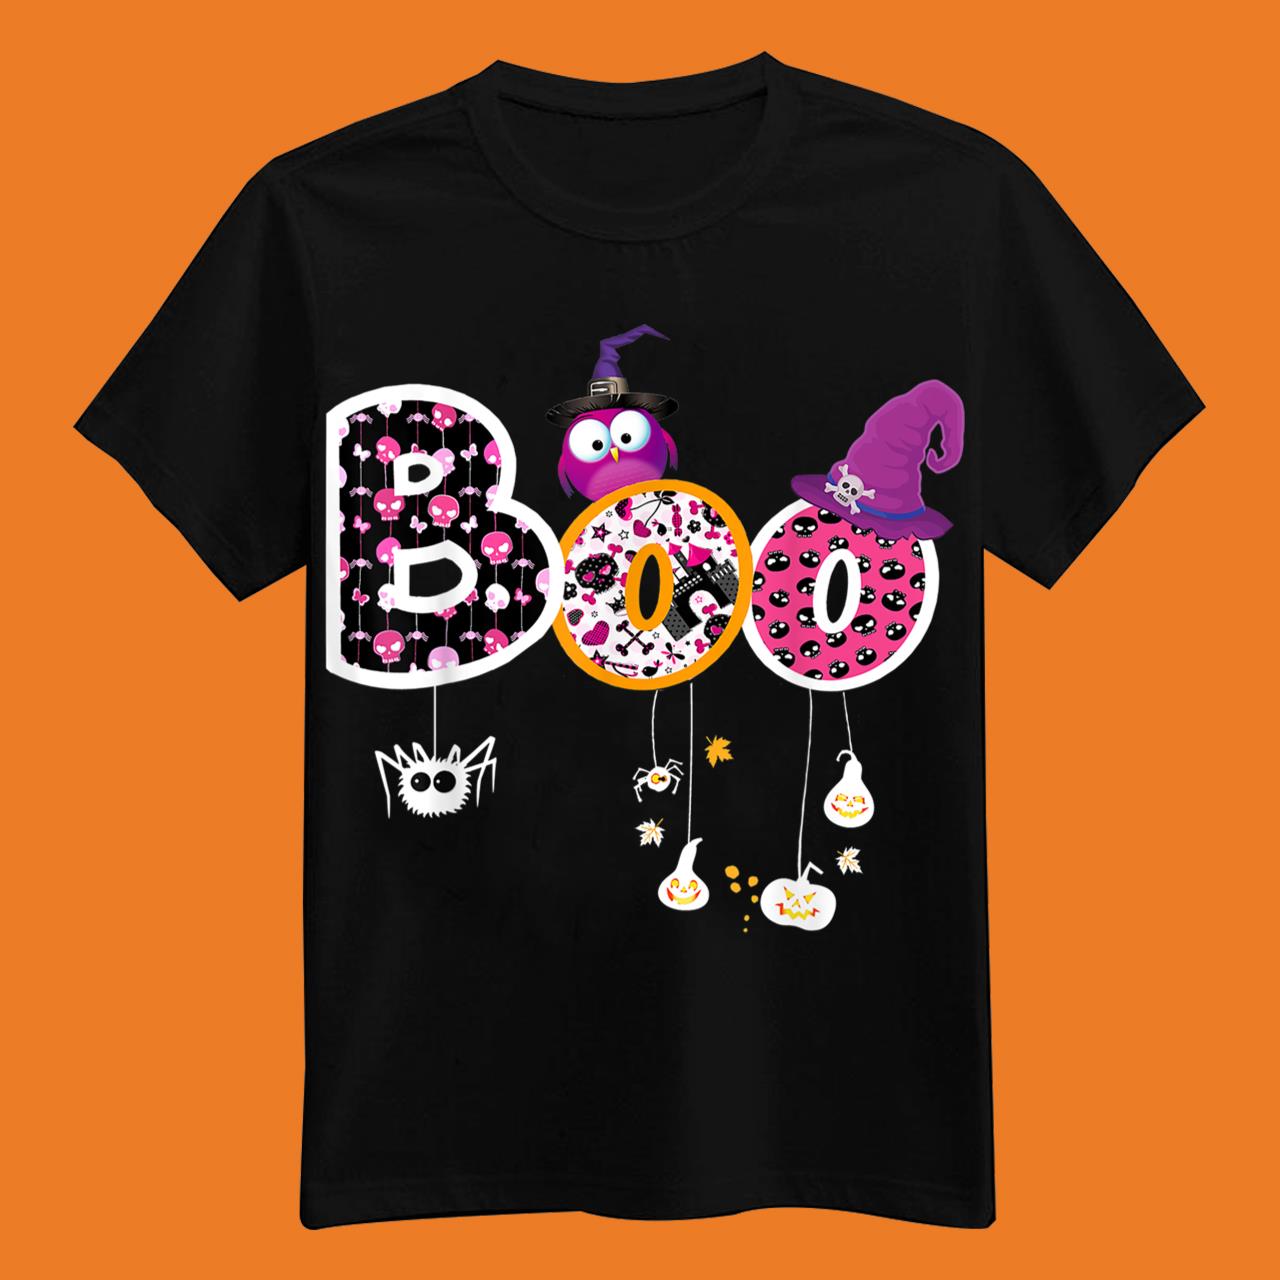 Boo Halloween Costume Spiders, Ghosts, Pumkin & Witch Hat T-Shirt